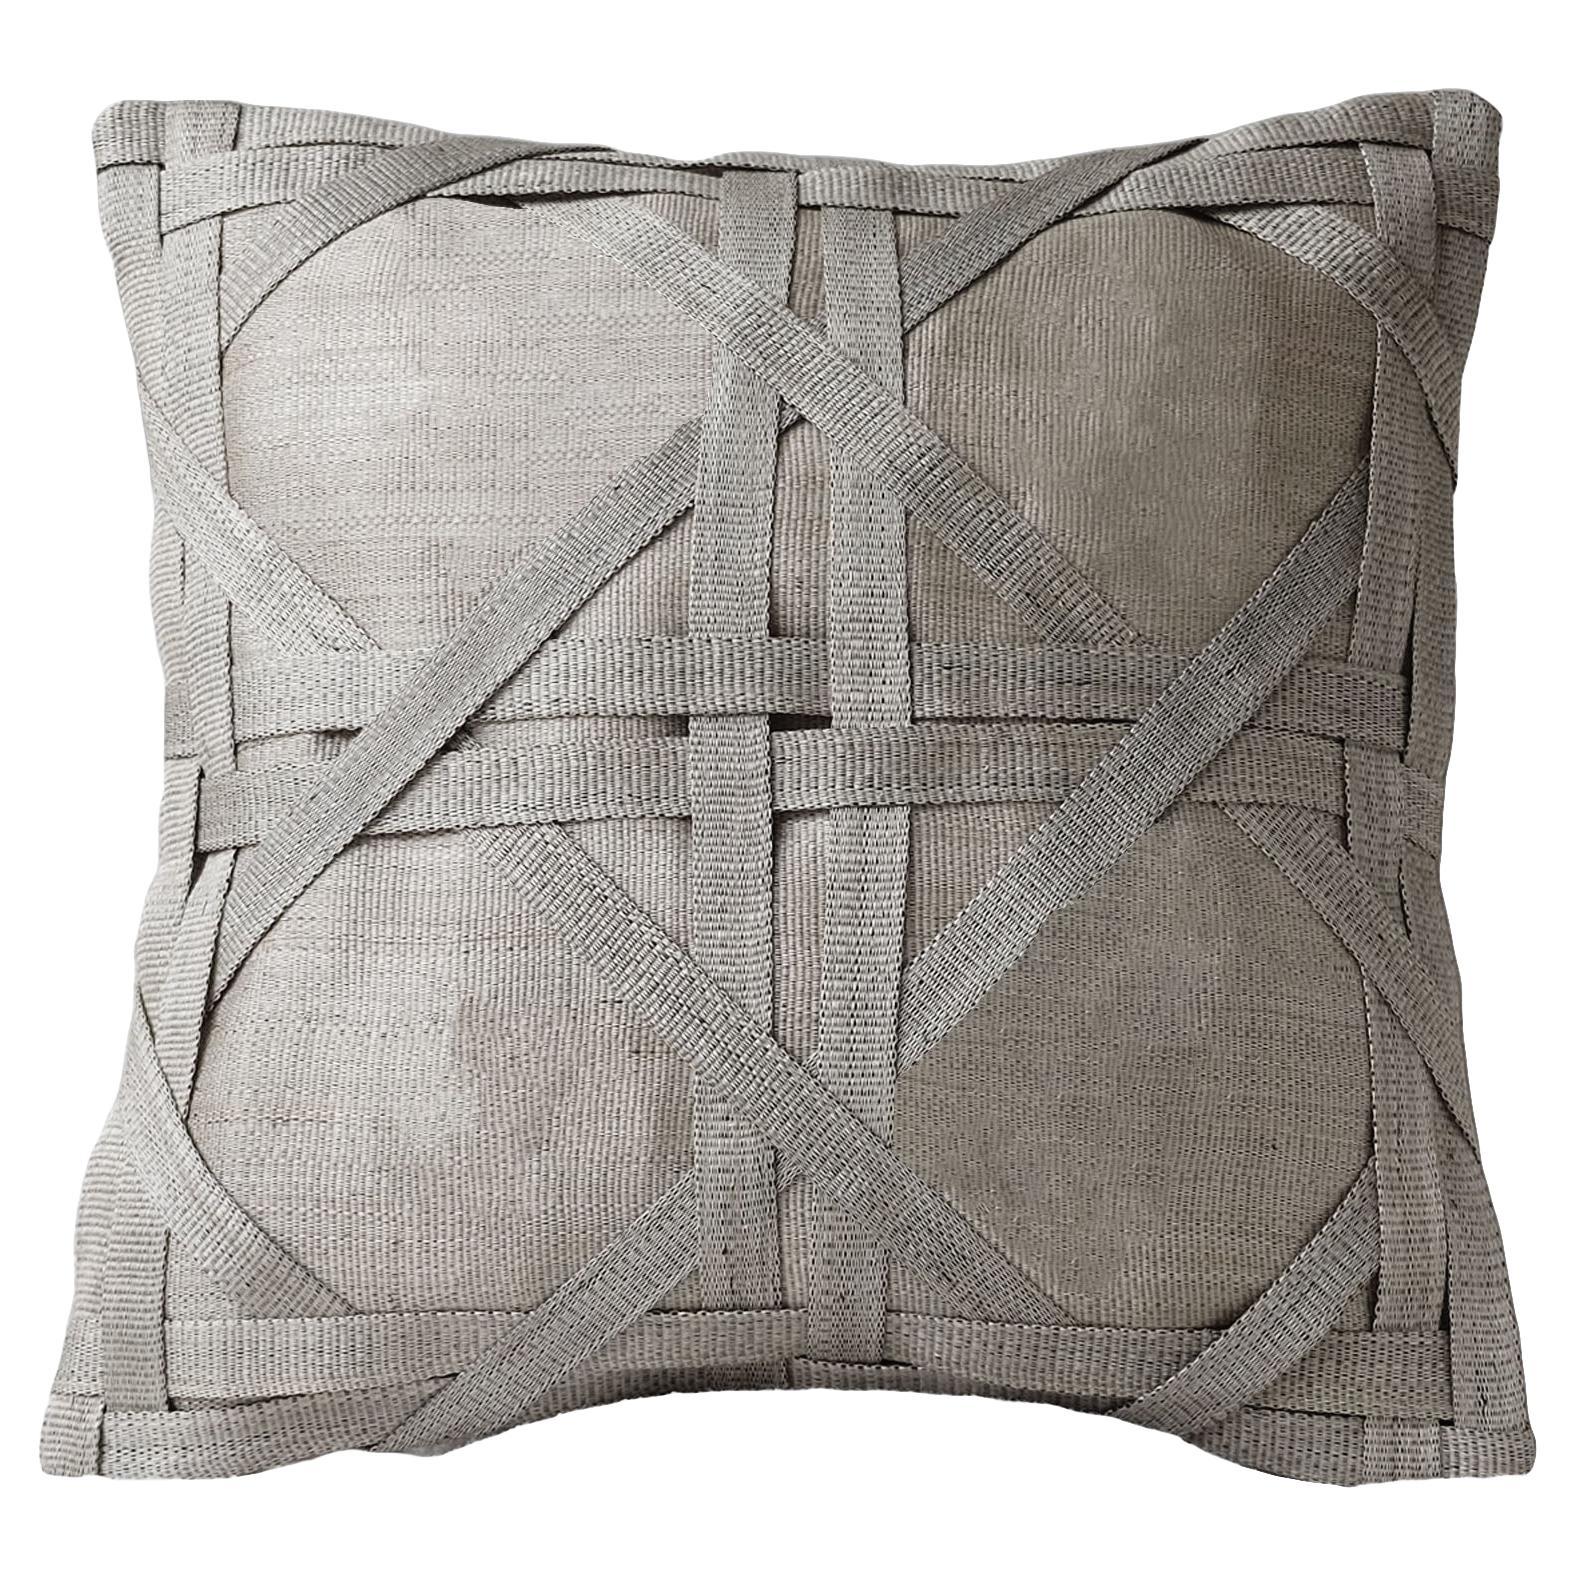 Handcrafted T'nalak Solihiya Weave Cushion Cover in Grey